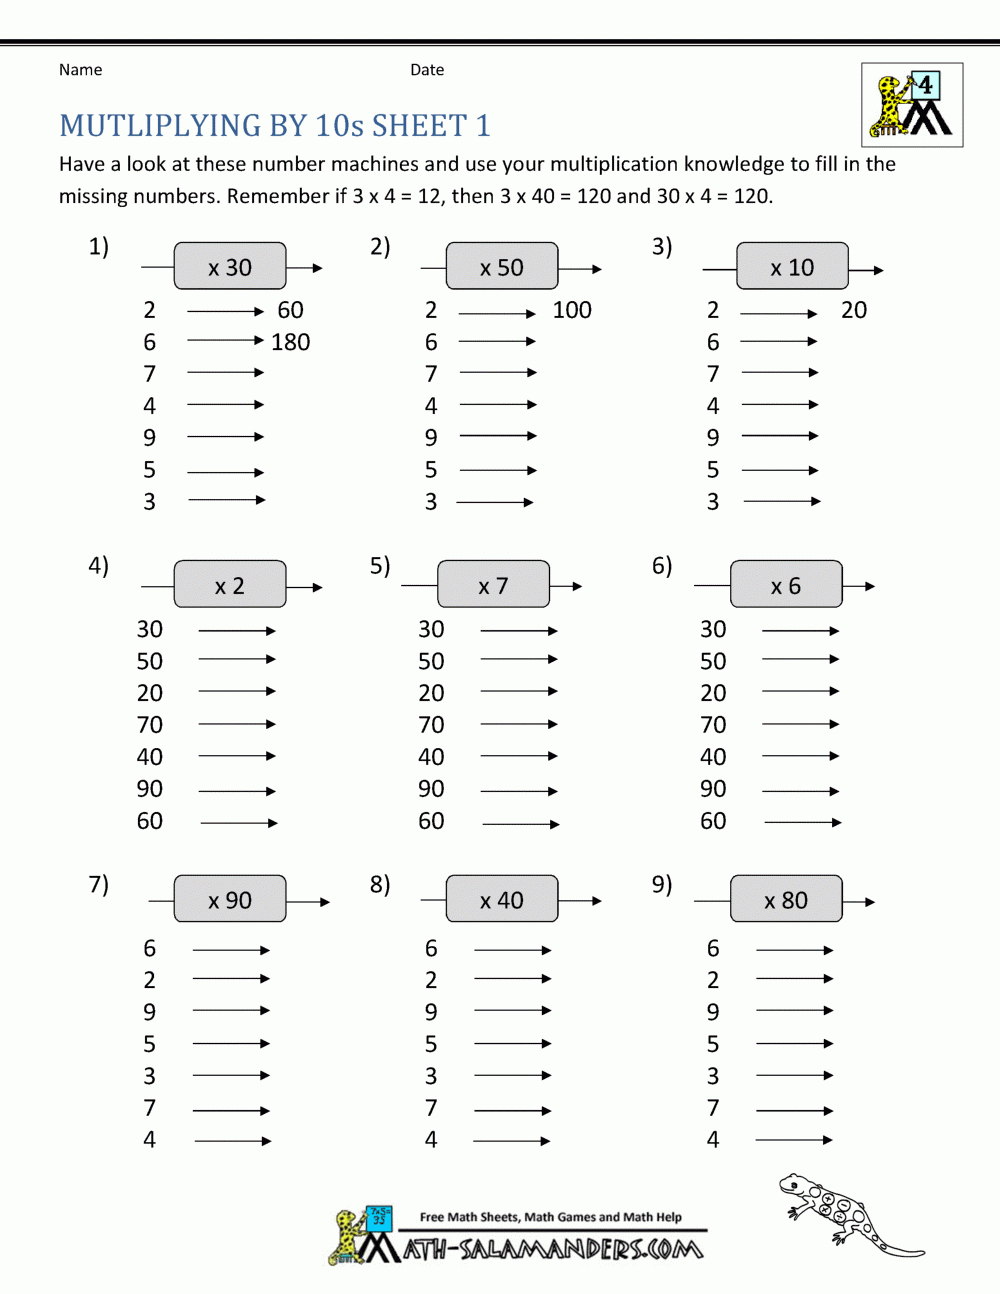 Multiplication Fact Sheets with regard to Free Printable Multiplication Facts Quiz